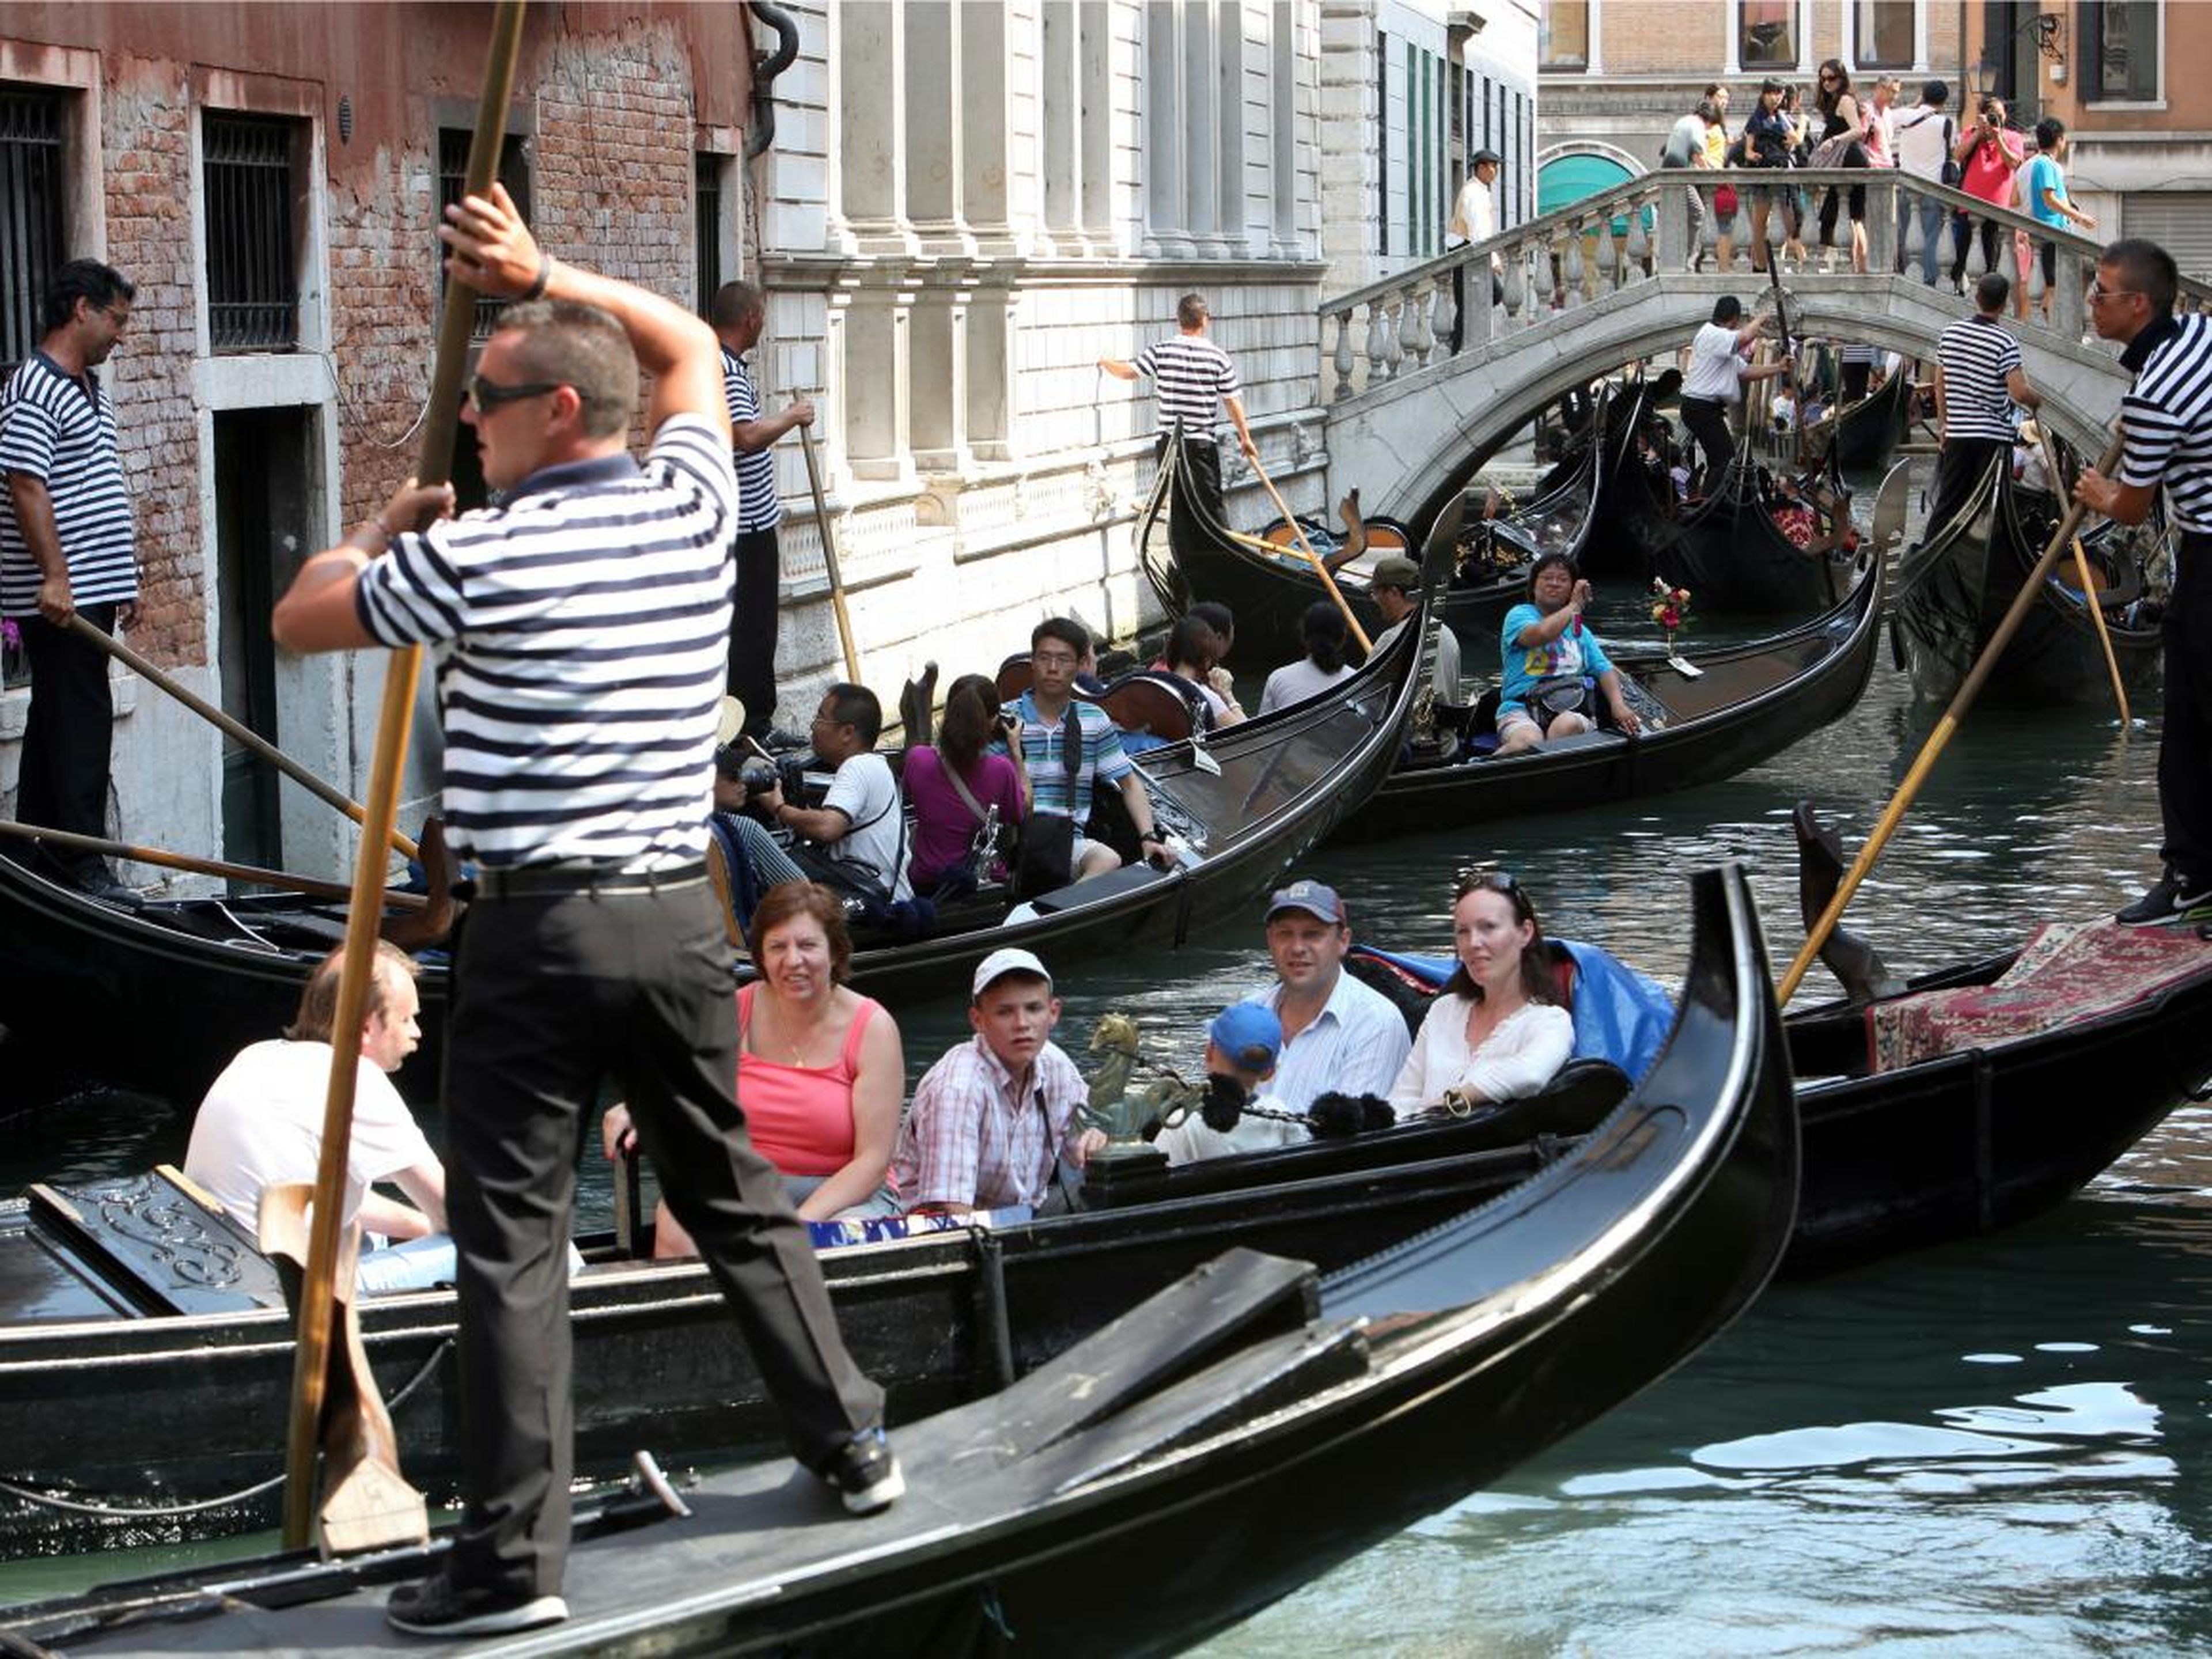 There's a good chance you'll be surrounded by boats full of other tourists.